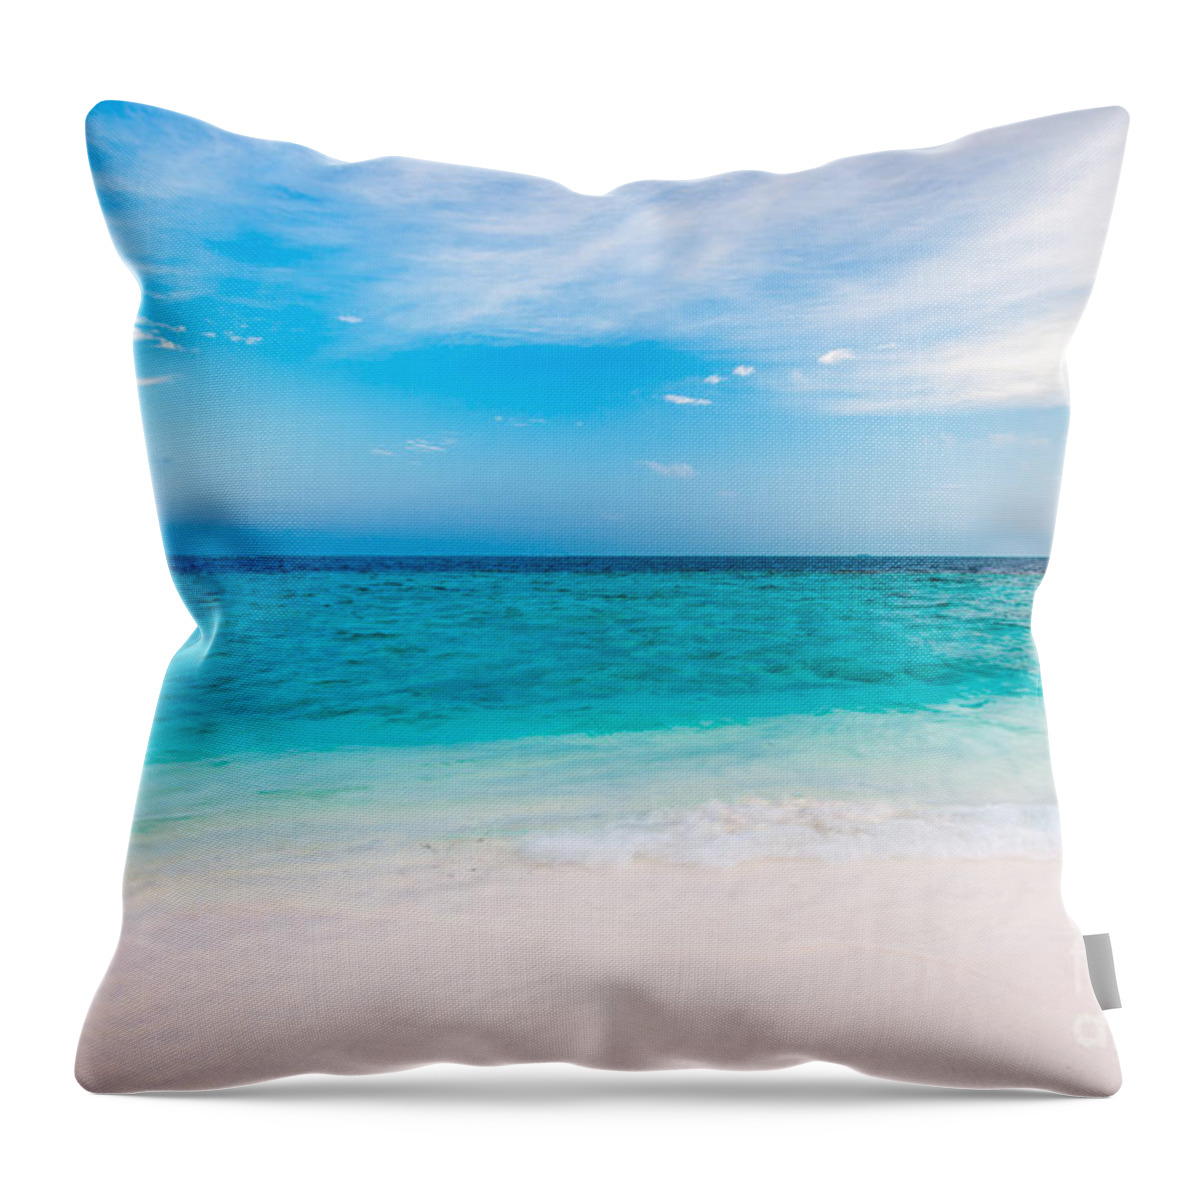 Bahamas Throw Pillow featuring the photograph Holiday Feeling by Hannes Cmarits